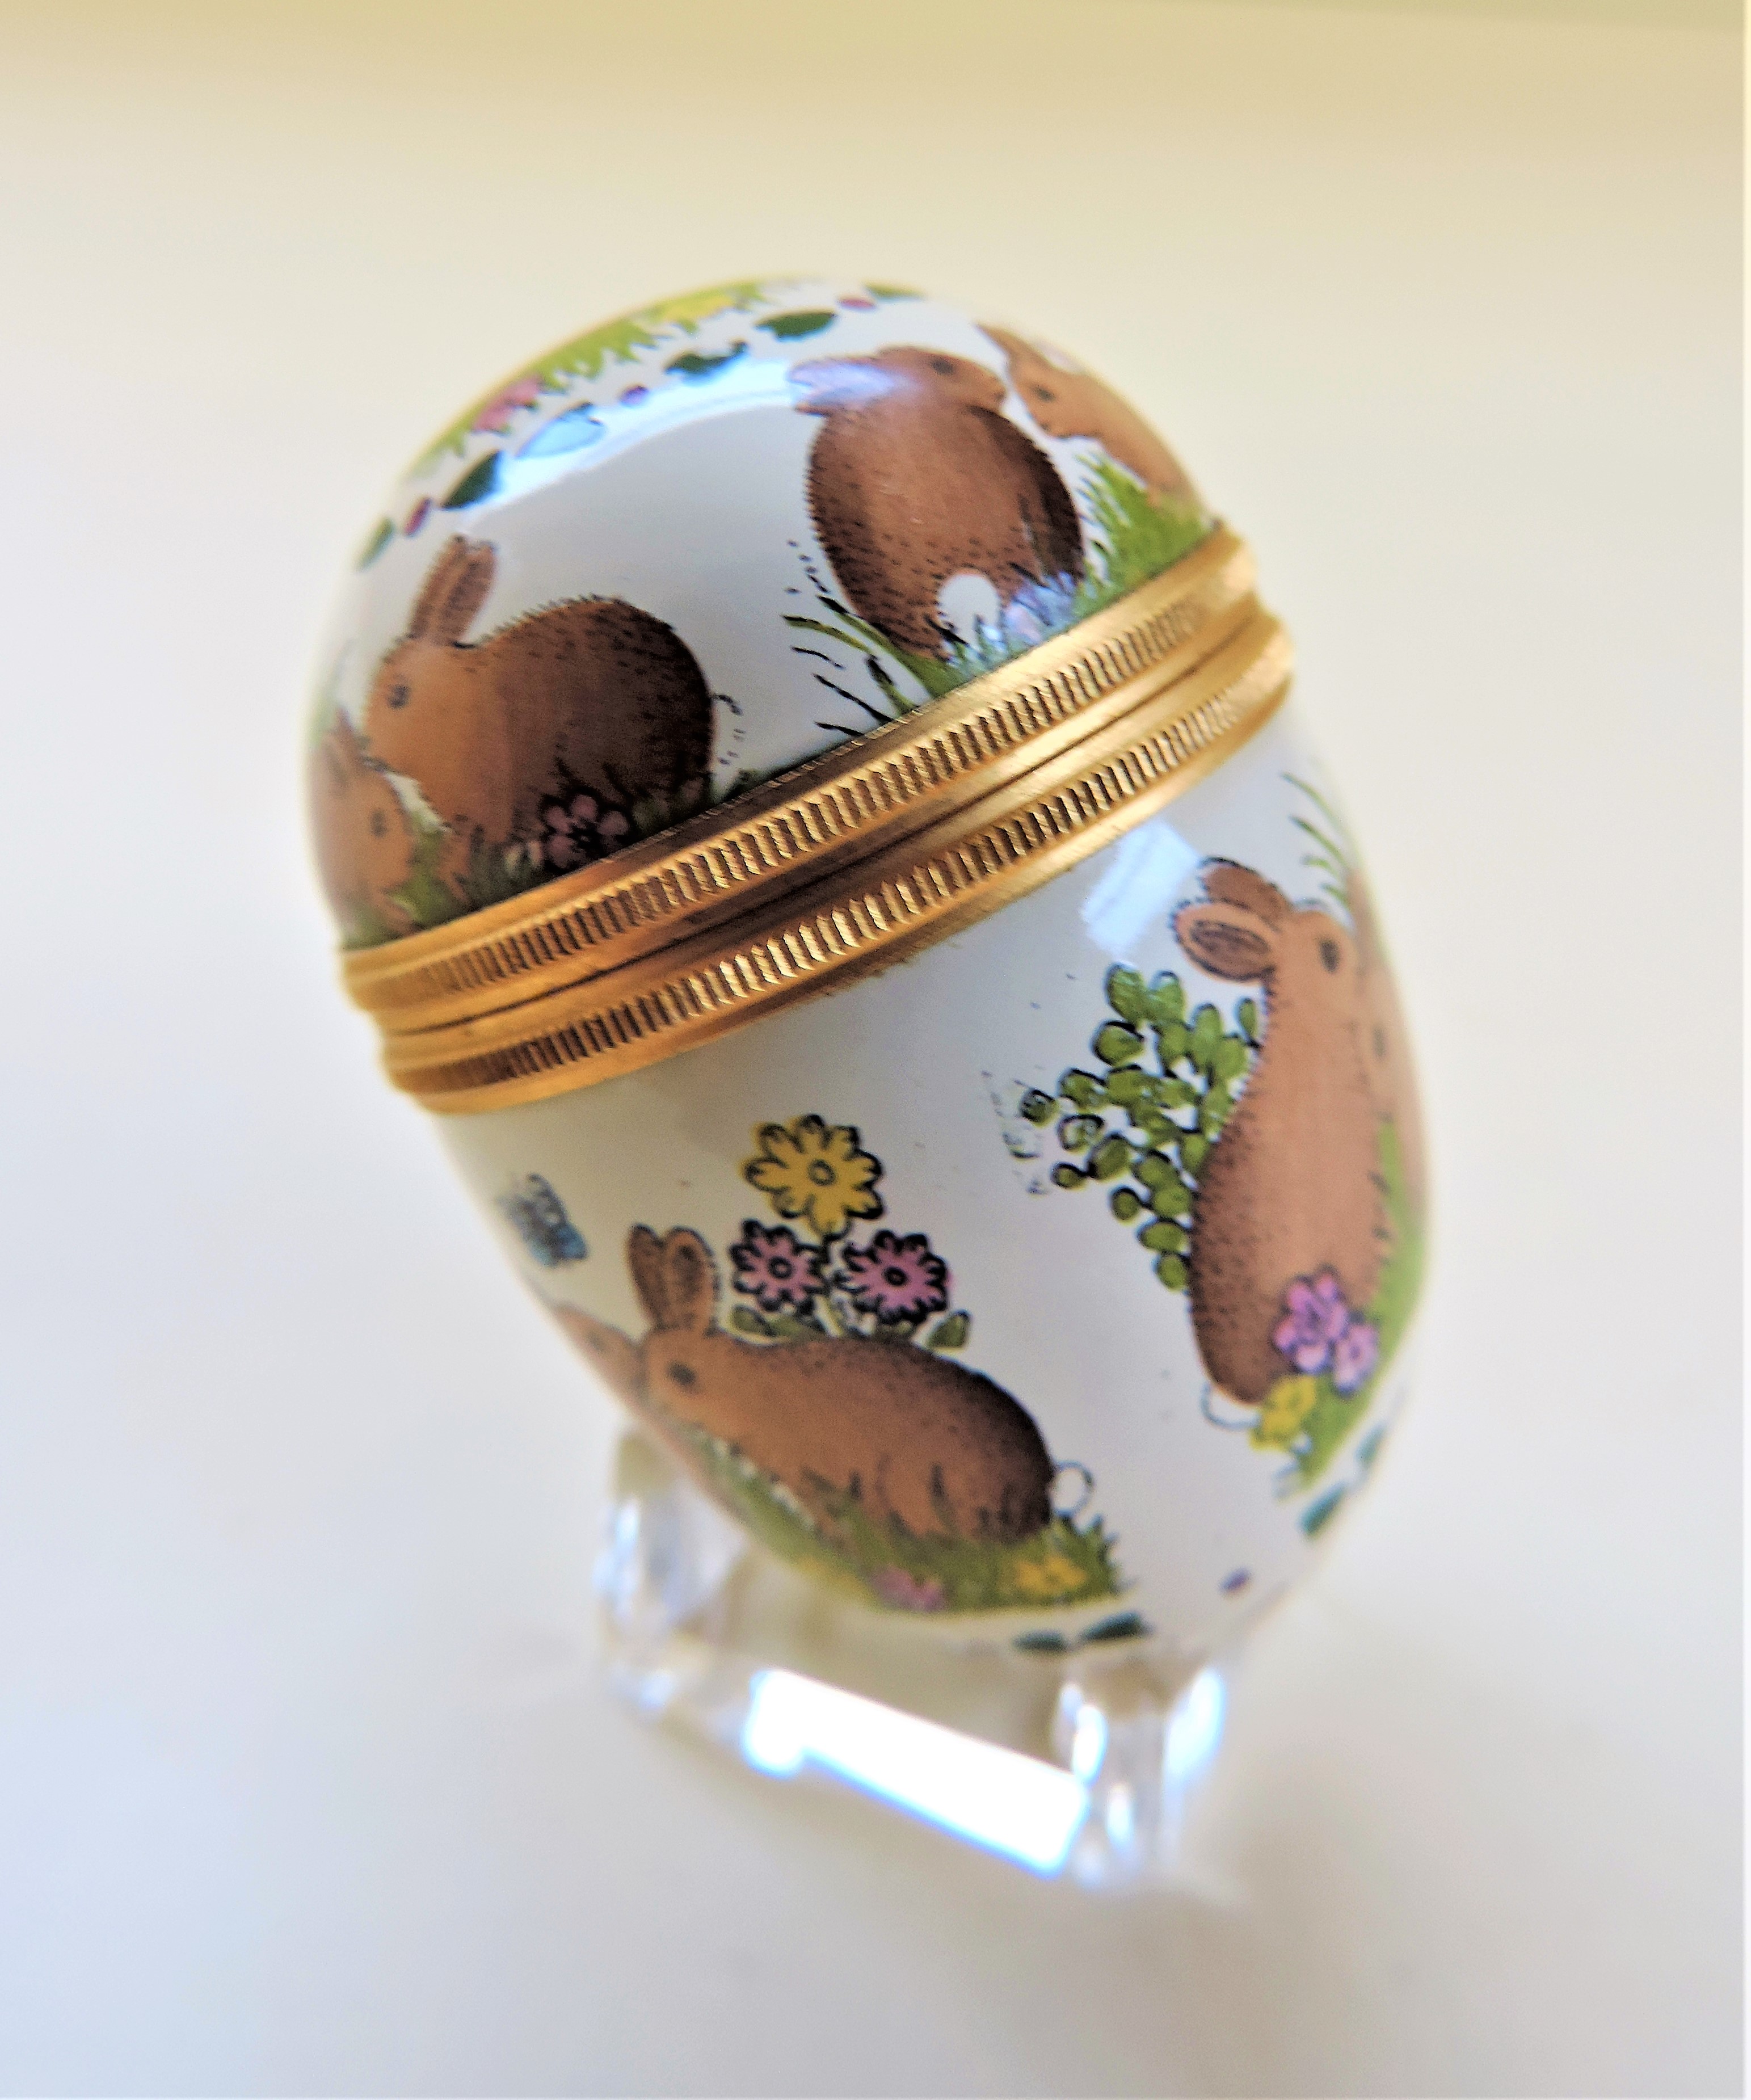 Halcyon Days Screw Top Mini Egg & Stand Bunny Family Hearts - Image 4 of 7